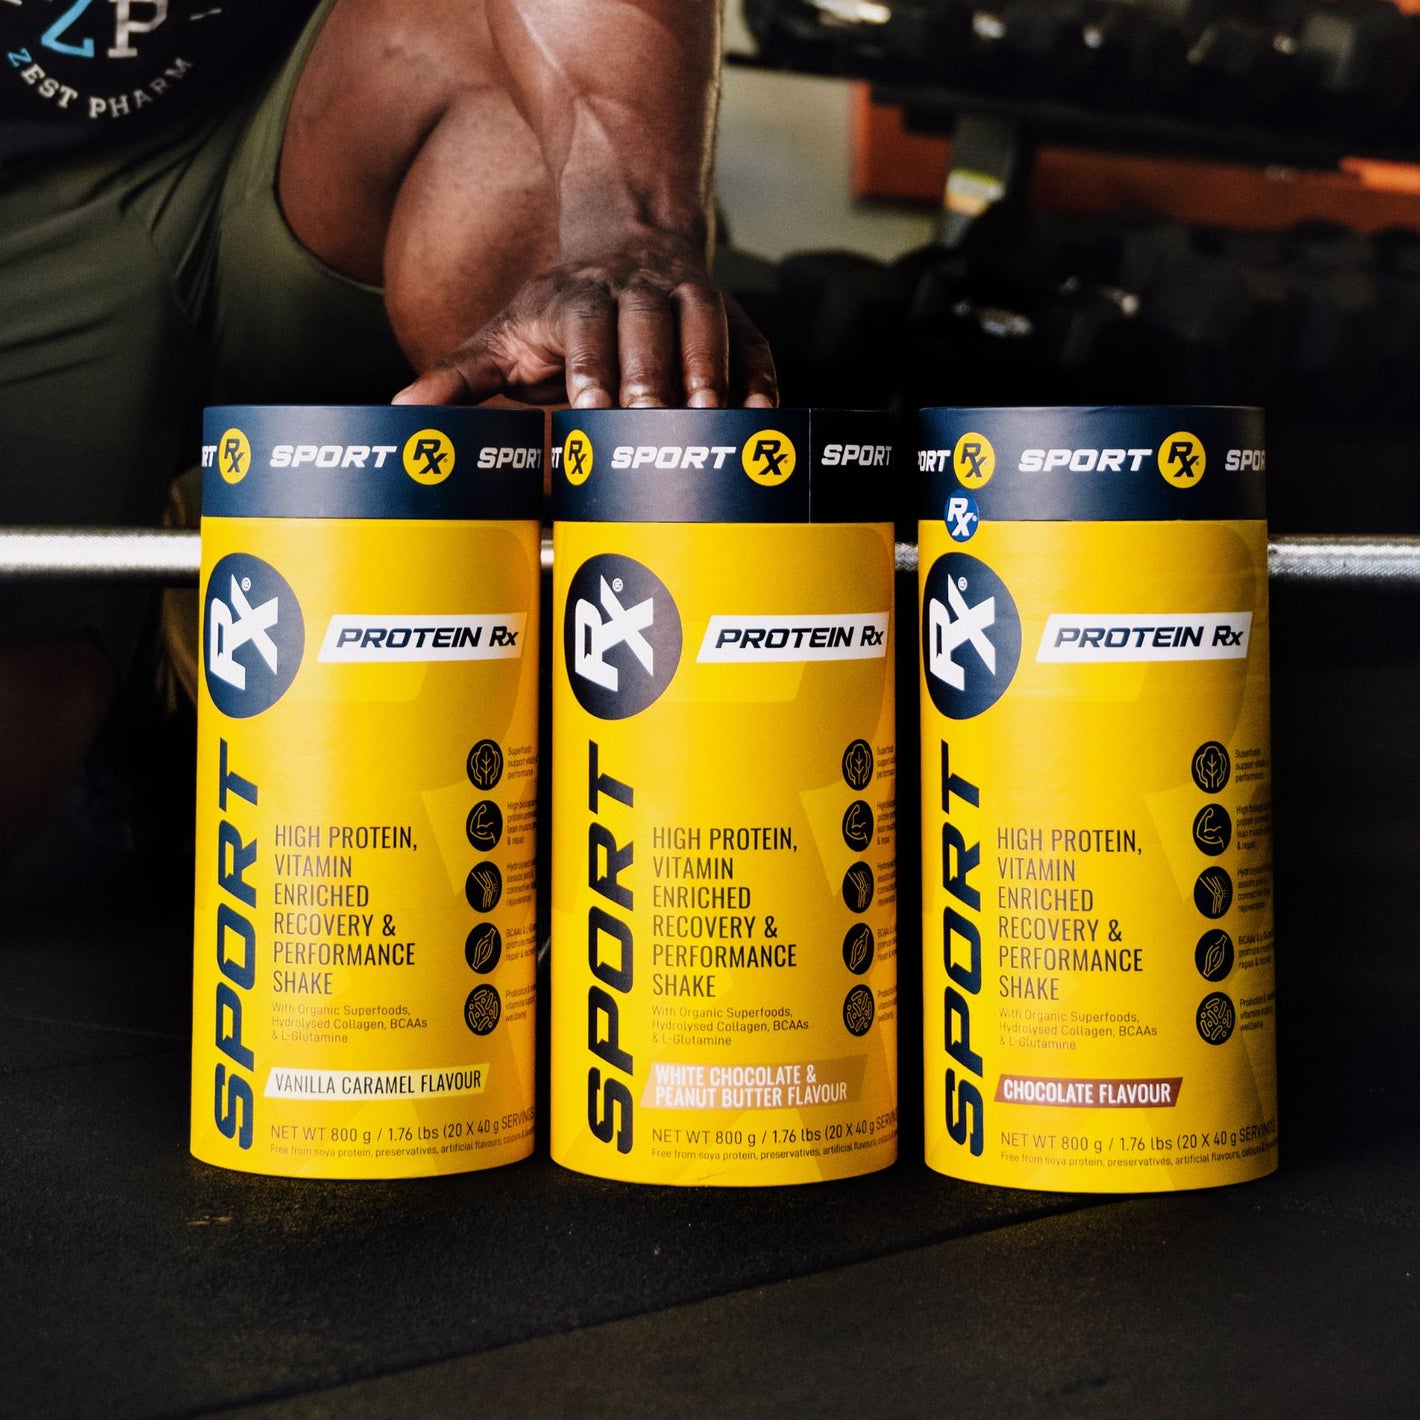 3_PROTEIN_Rx_Products_In_A_Gym_Setting